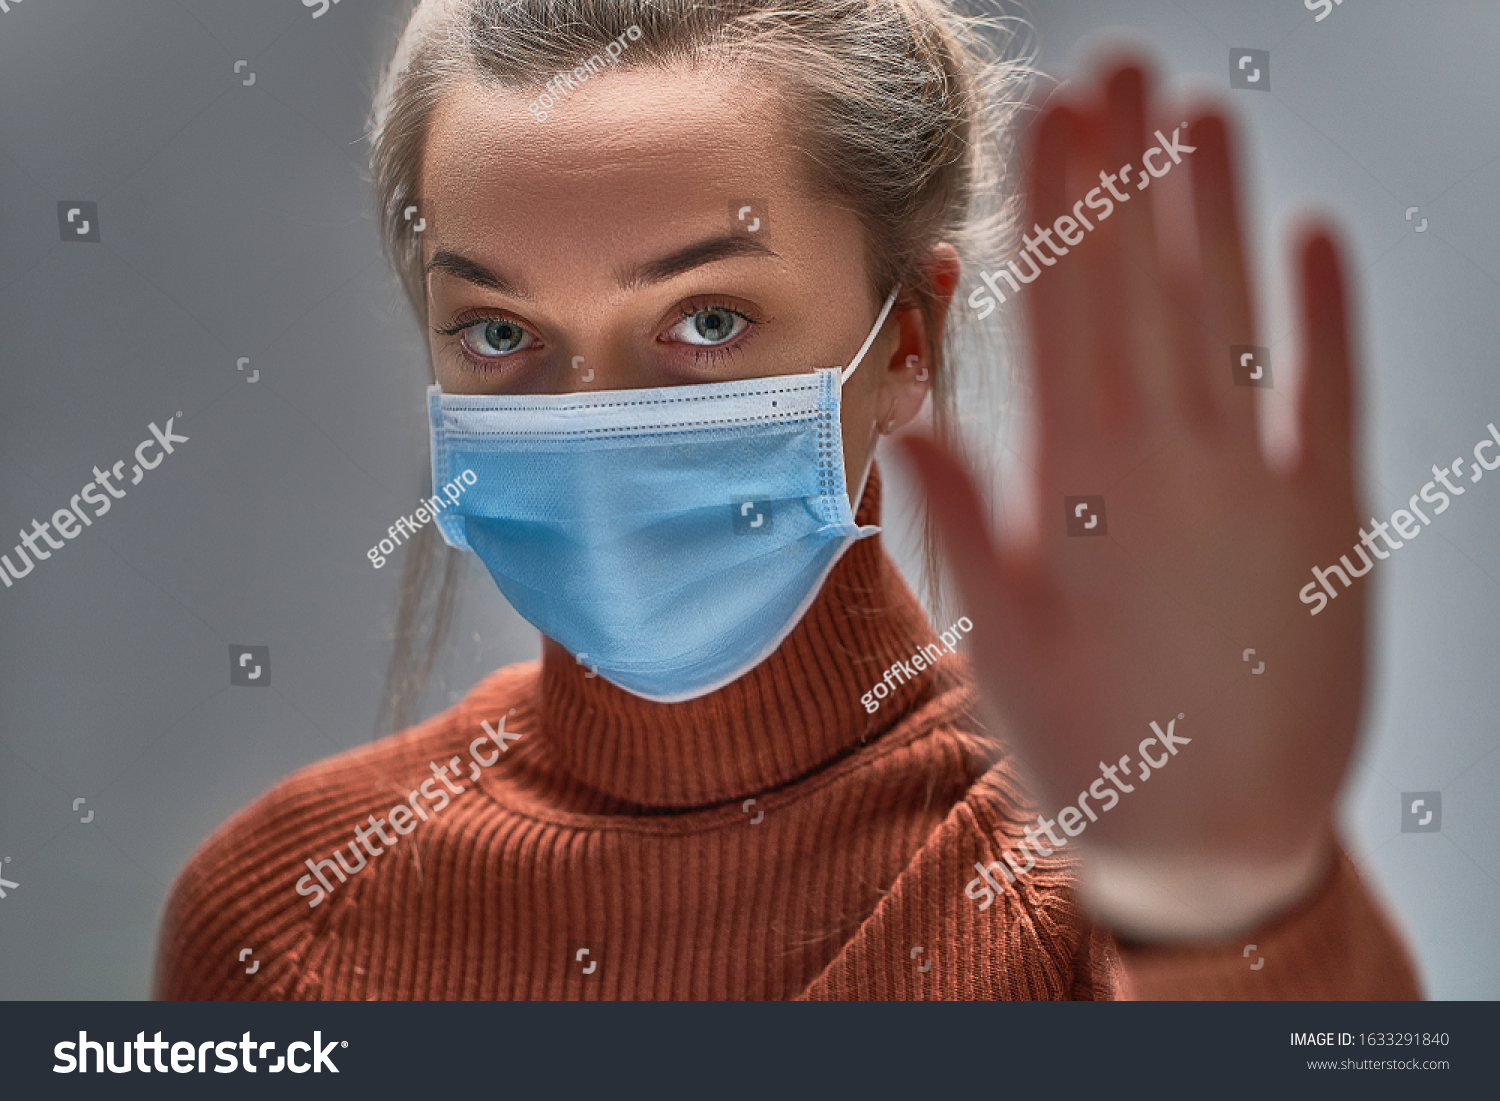 Stop the virus and epidemic diseases. Healthy woman in blue medical protective mask showing gesture stop. Health protection and prevention during flu and infectious outbreak #1633291840